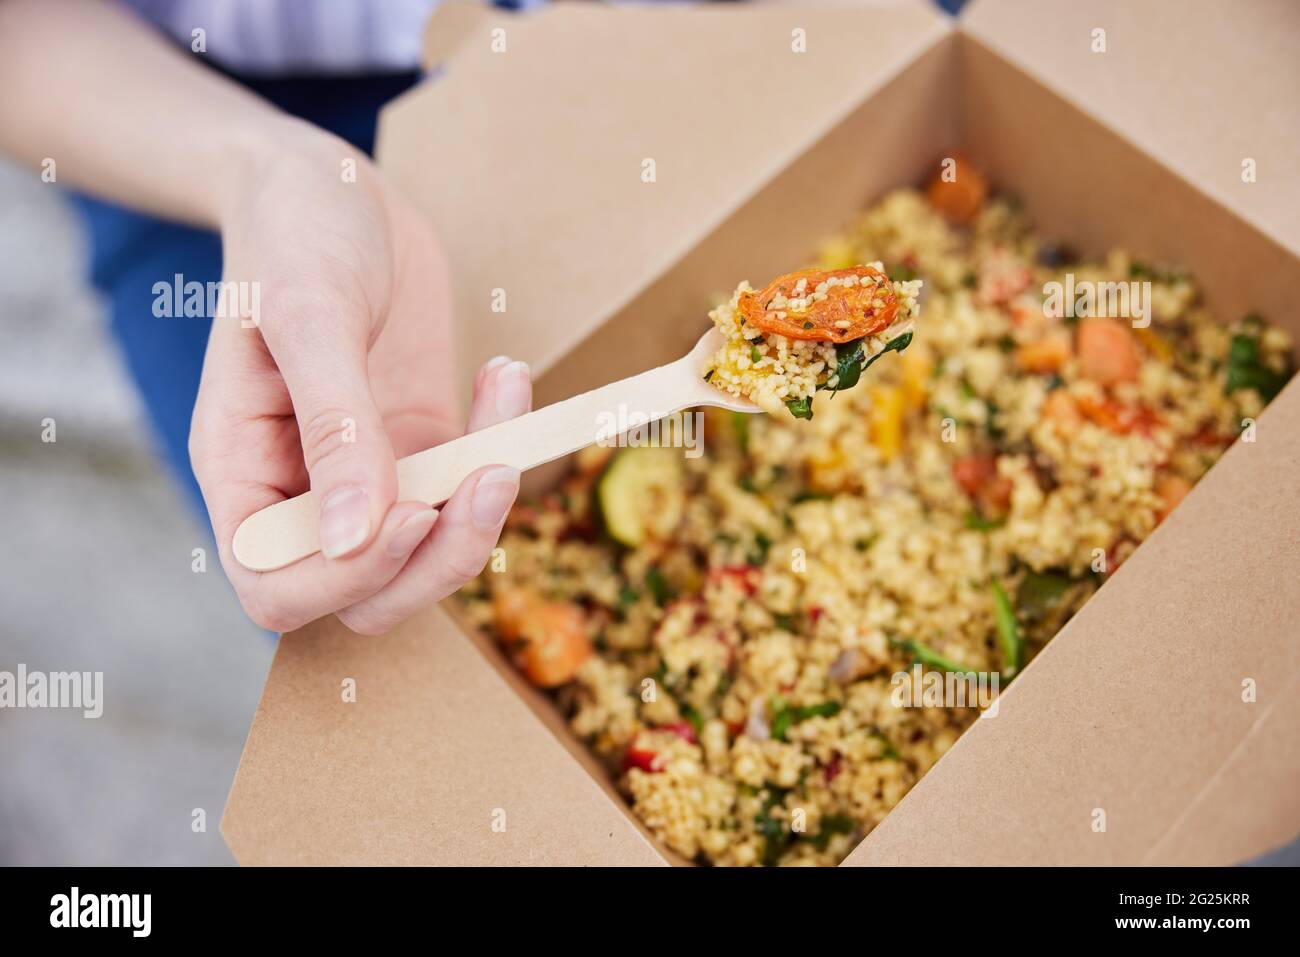 Close Up Of Woman Eating Healthy Vegan Or Vegetarian Takeaway Lunch From Recyclable Packaging With Wooden Fork Stock Photo